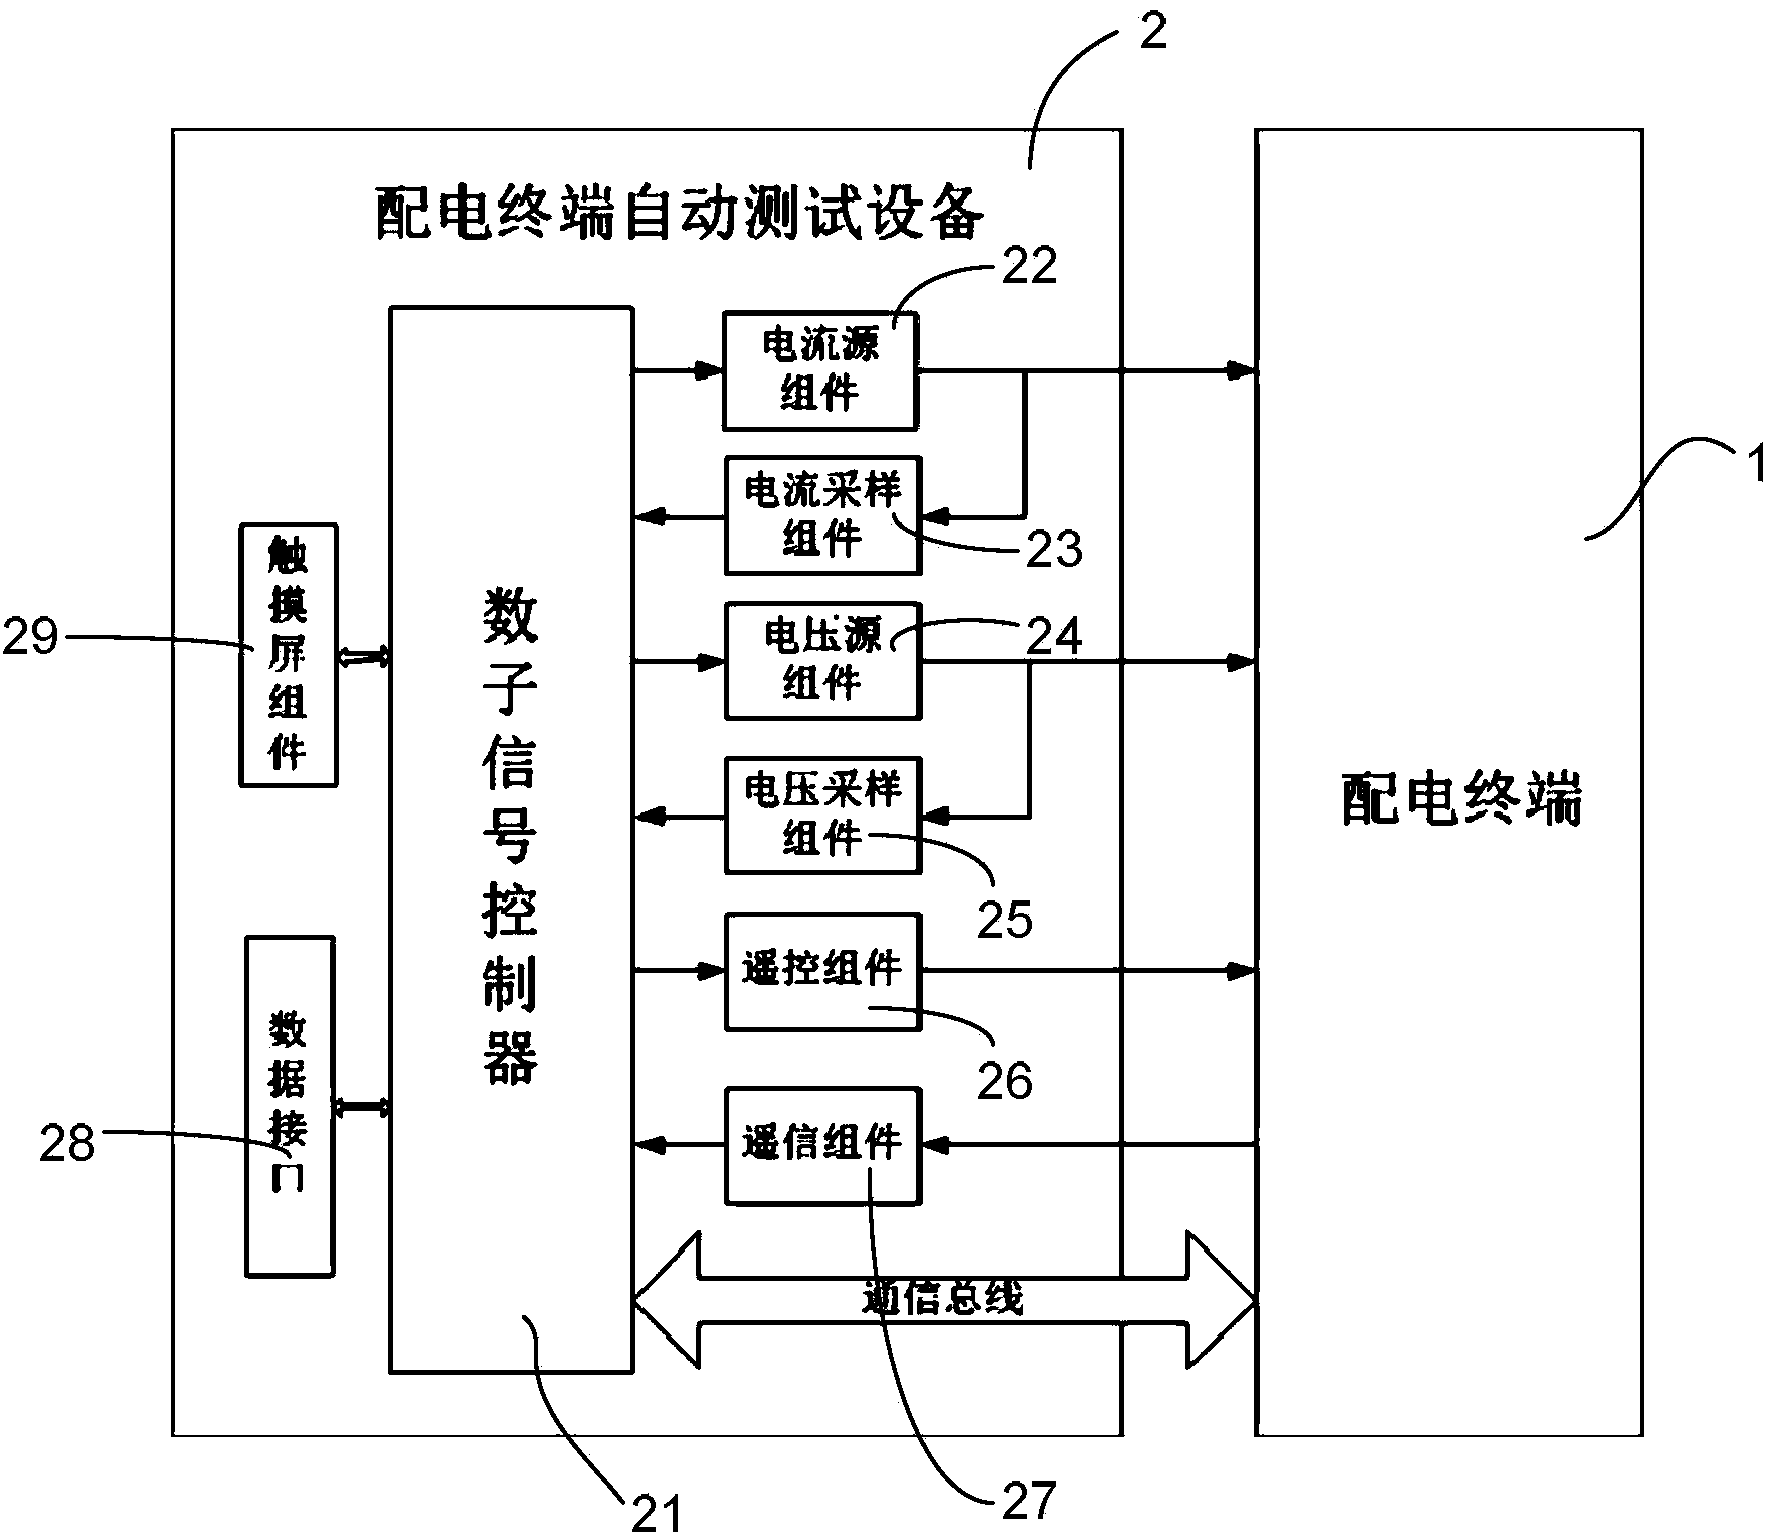 Three-remote automatic test device for power distribution terminal